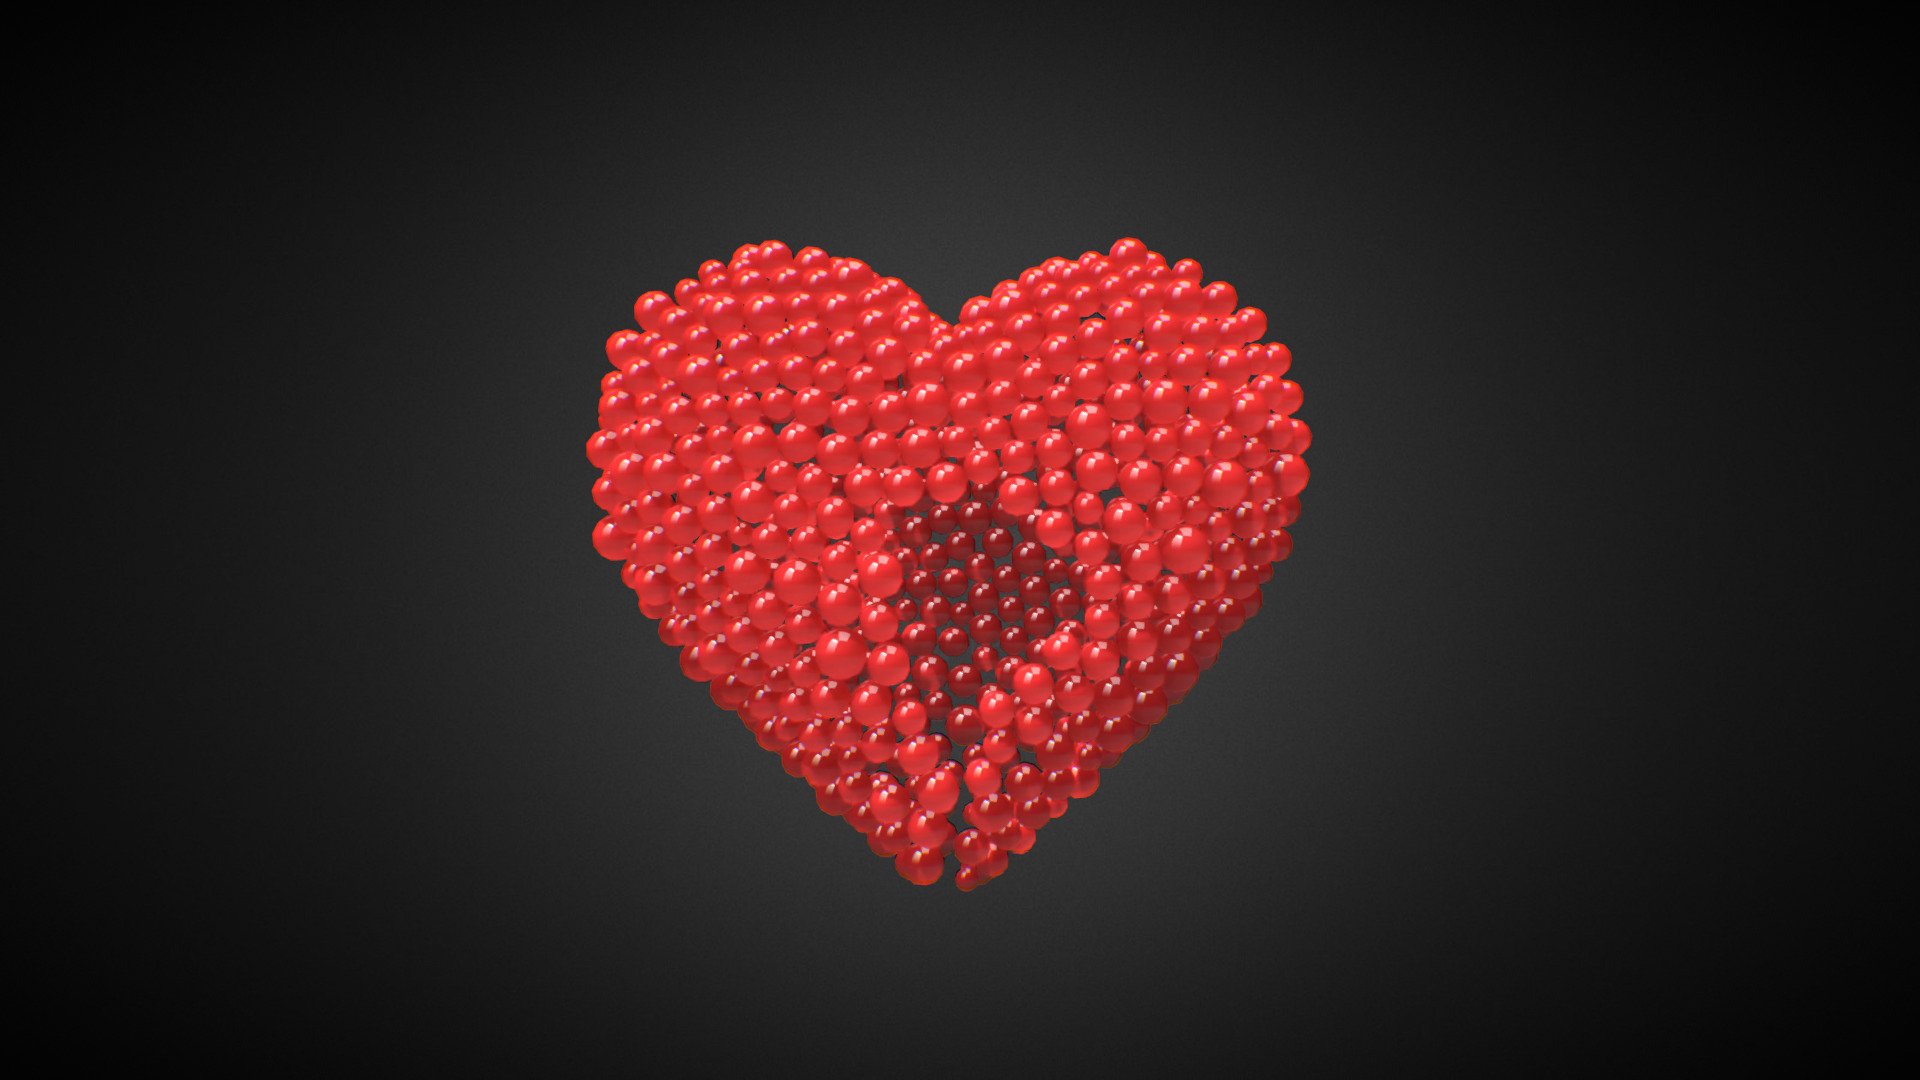 Beating Heart shape - animation from spheres